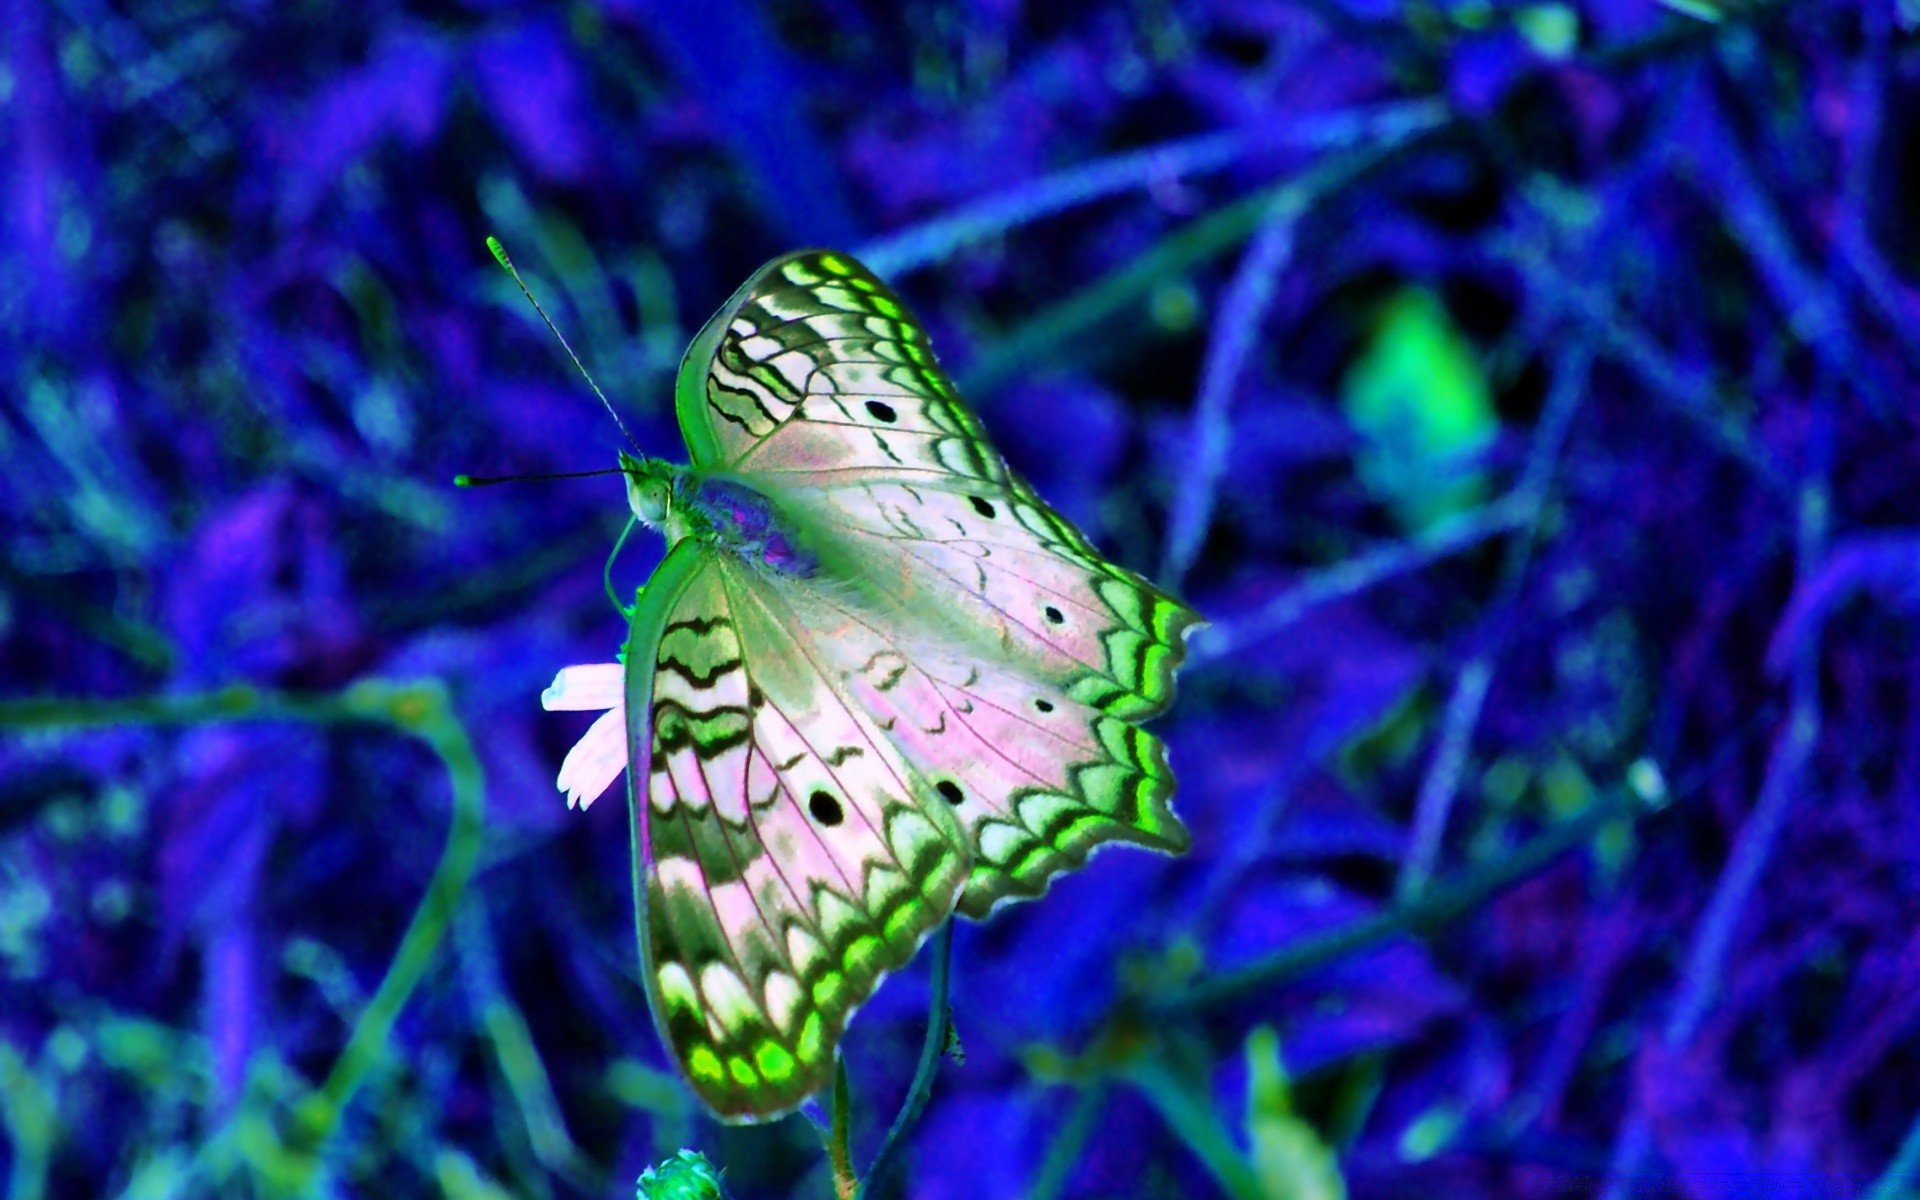 creative butterfly nature insect animal wildlife flower summer outdoors wing color garden flora beautiful little bright wild invertebrate biology close-up